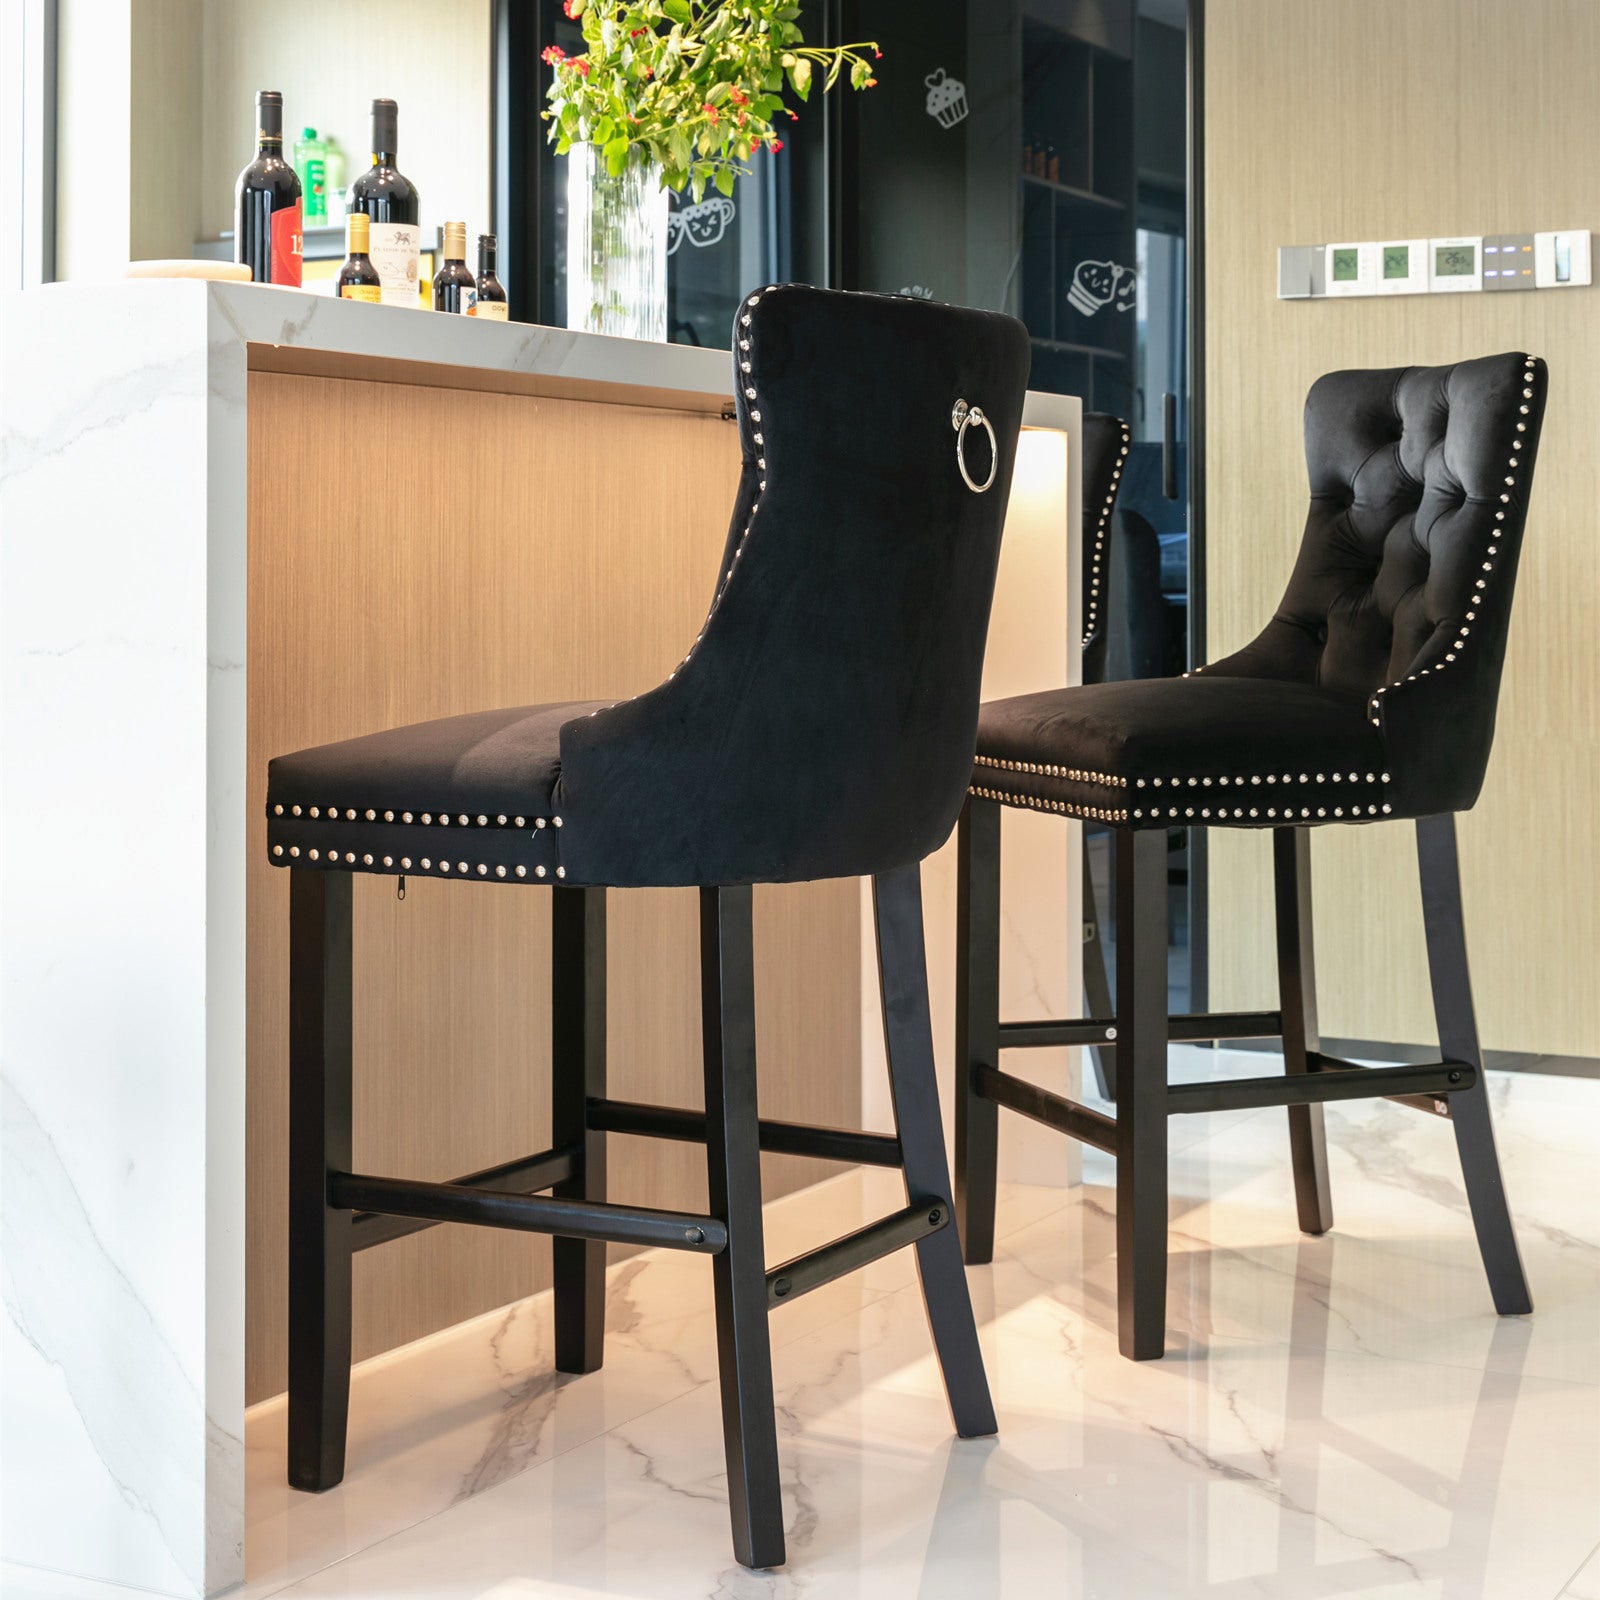 2X Velvet Bar Stools with Studs Trim Wooden Legs Tufted Bar Chairs Kitchen-Black Odin Furniture